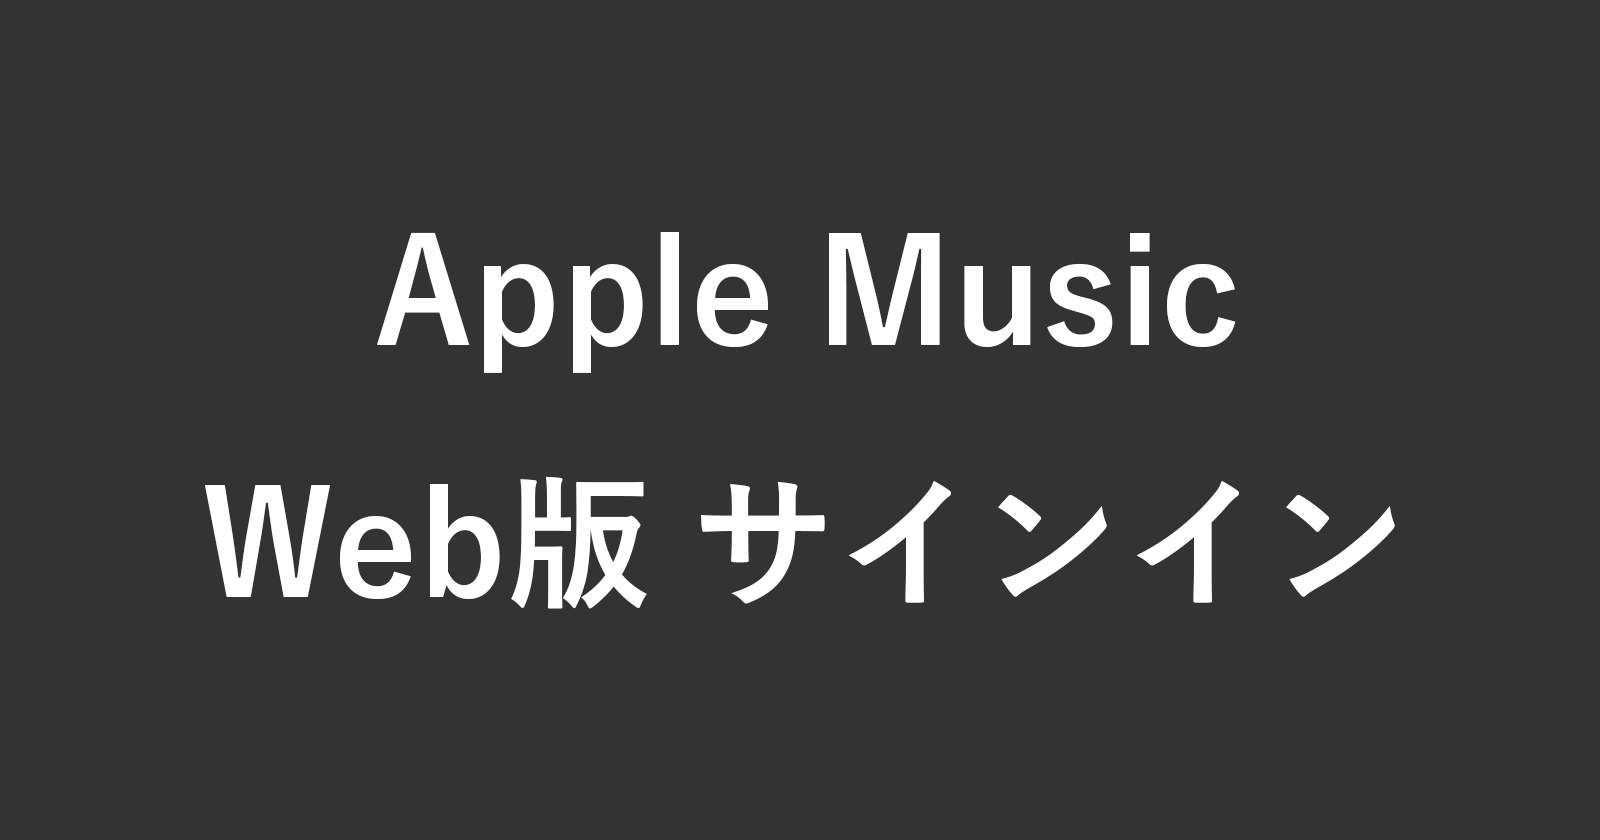 apple music web sign in